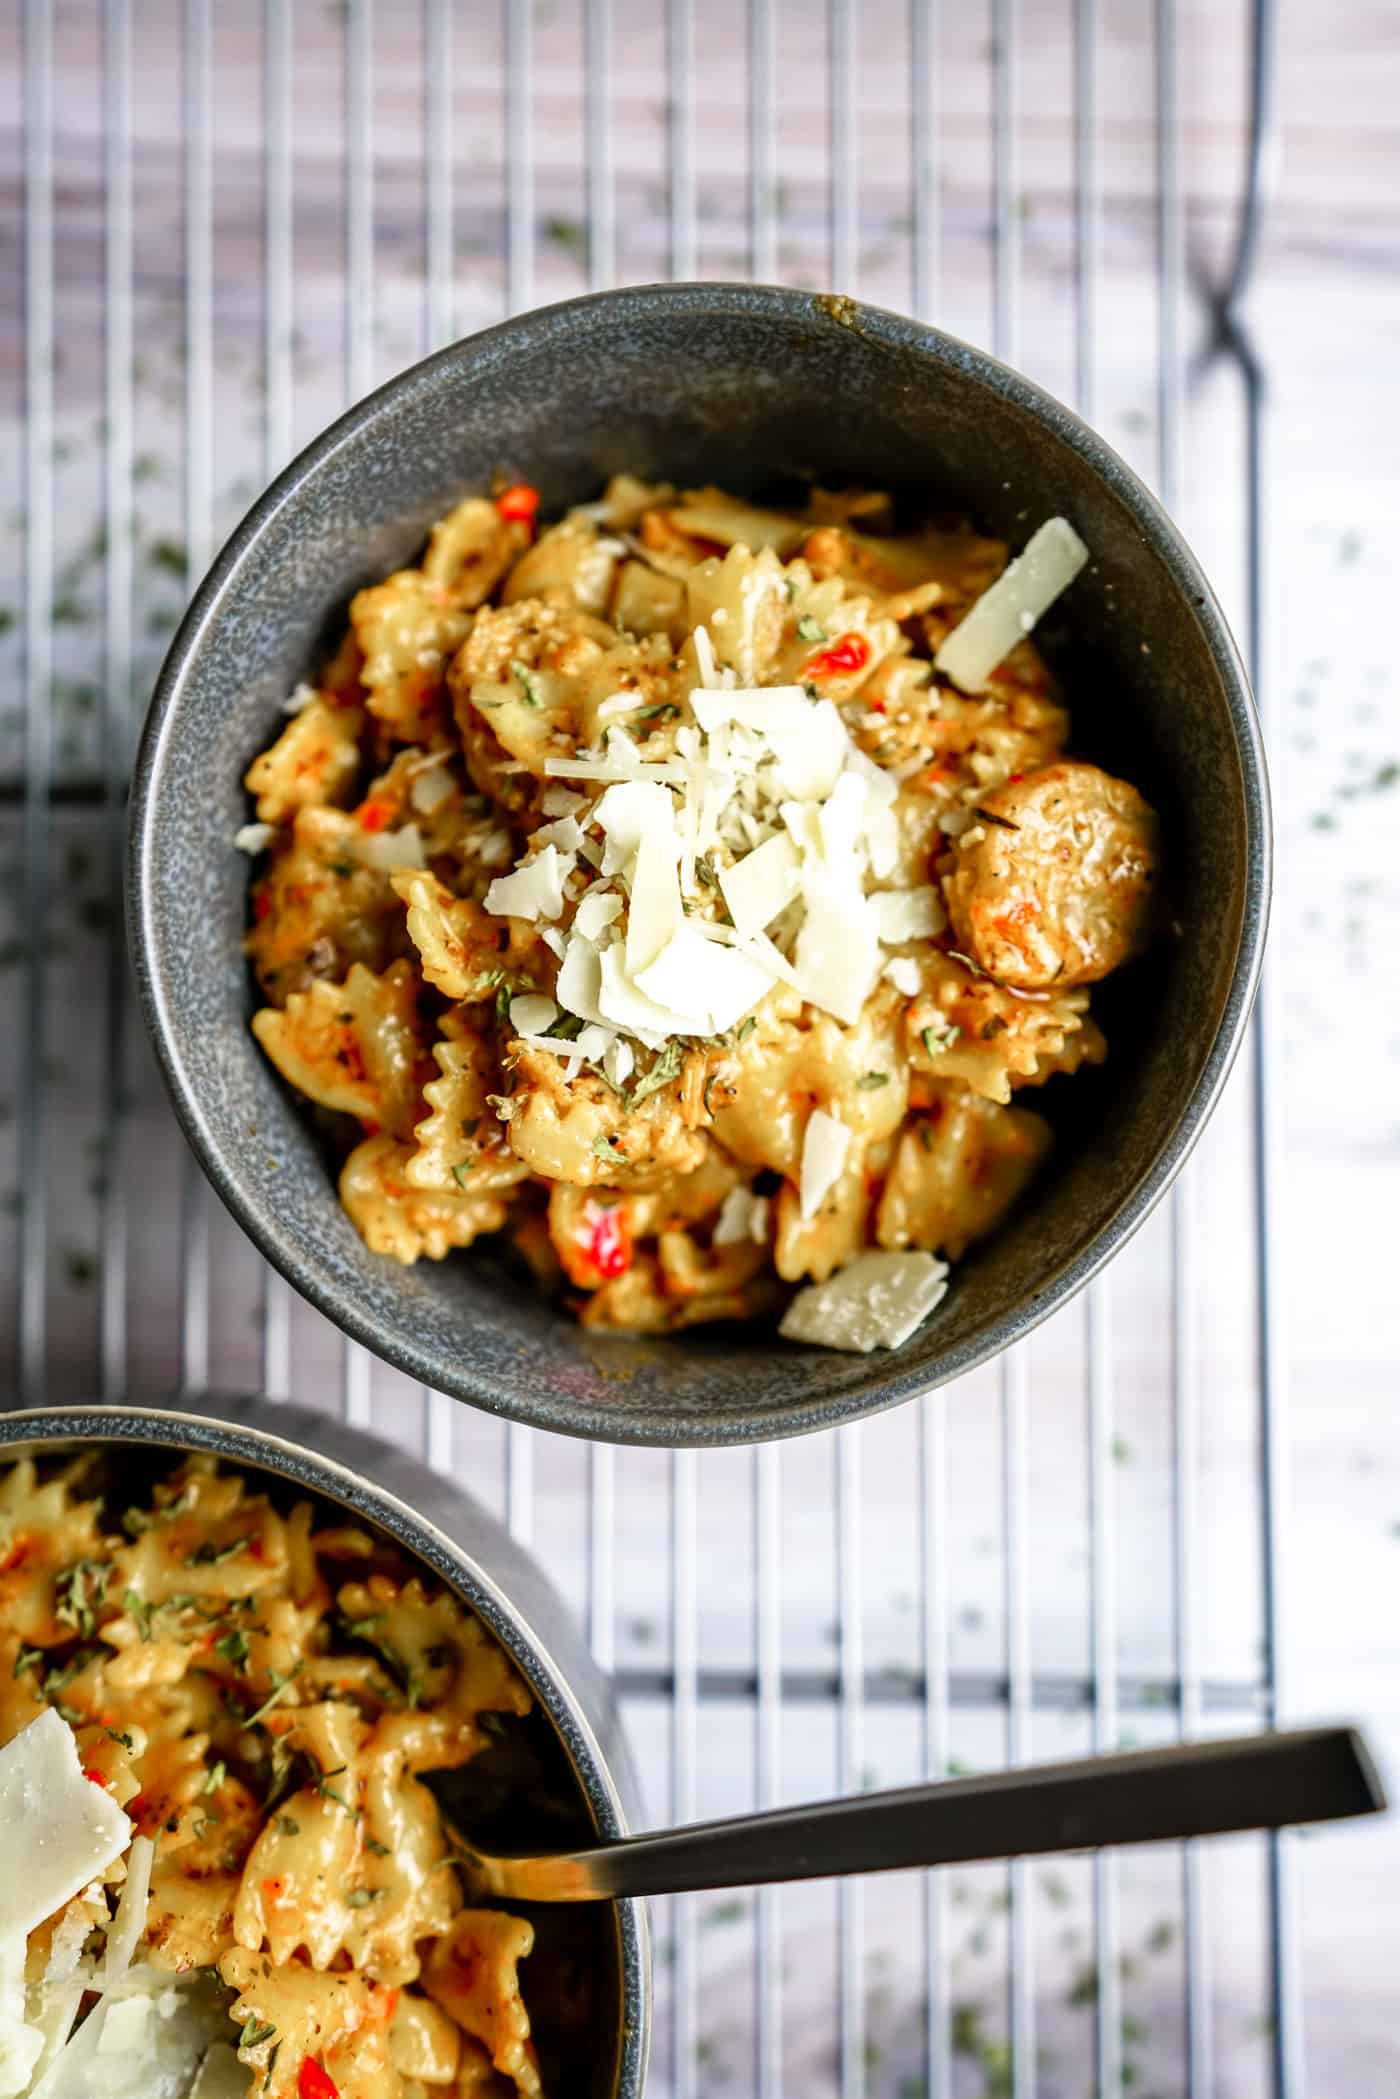 Need a quick and easy dinner tonight everyone in your house will love?  Look no further than this Instant Pot Cajun Pasta with sausage! Packed with flavor, creamy sauce and delicious sausage. 